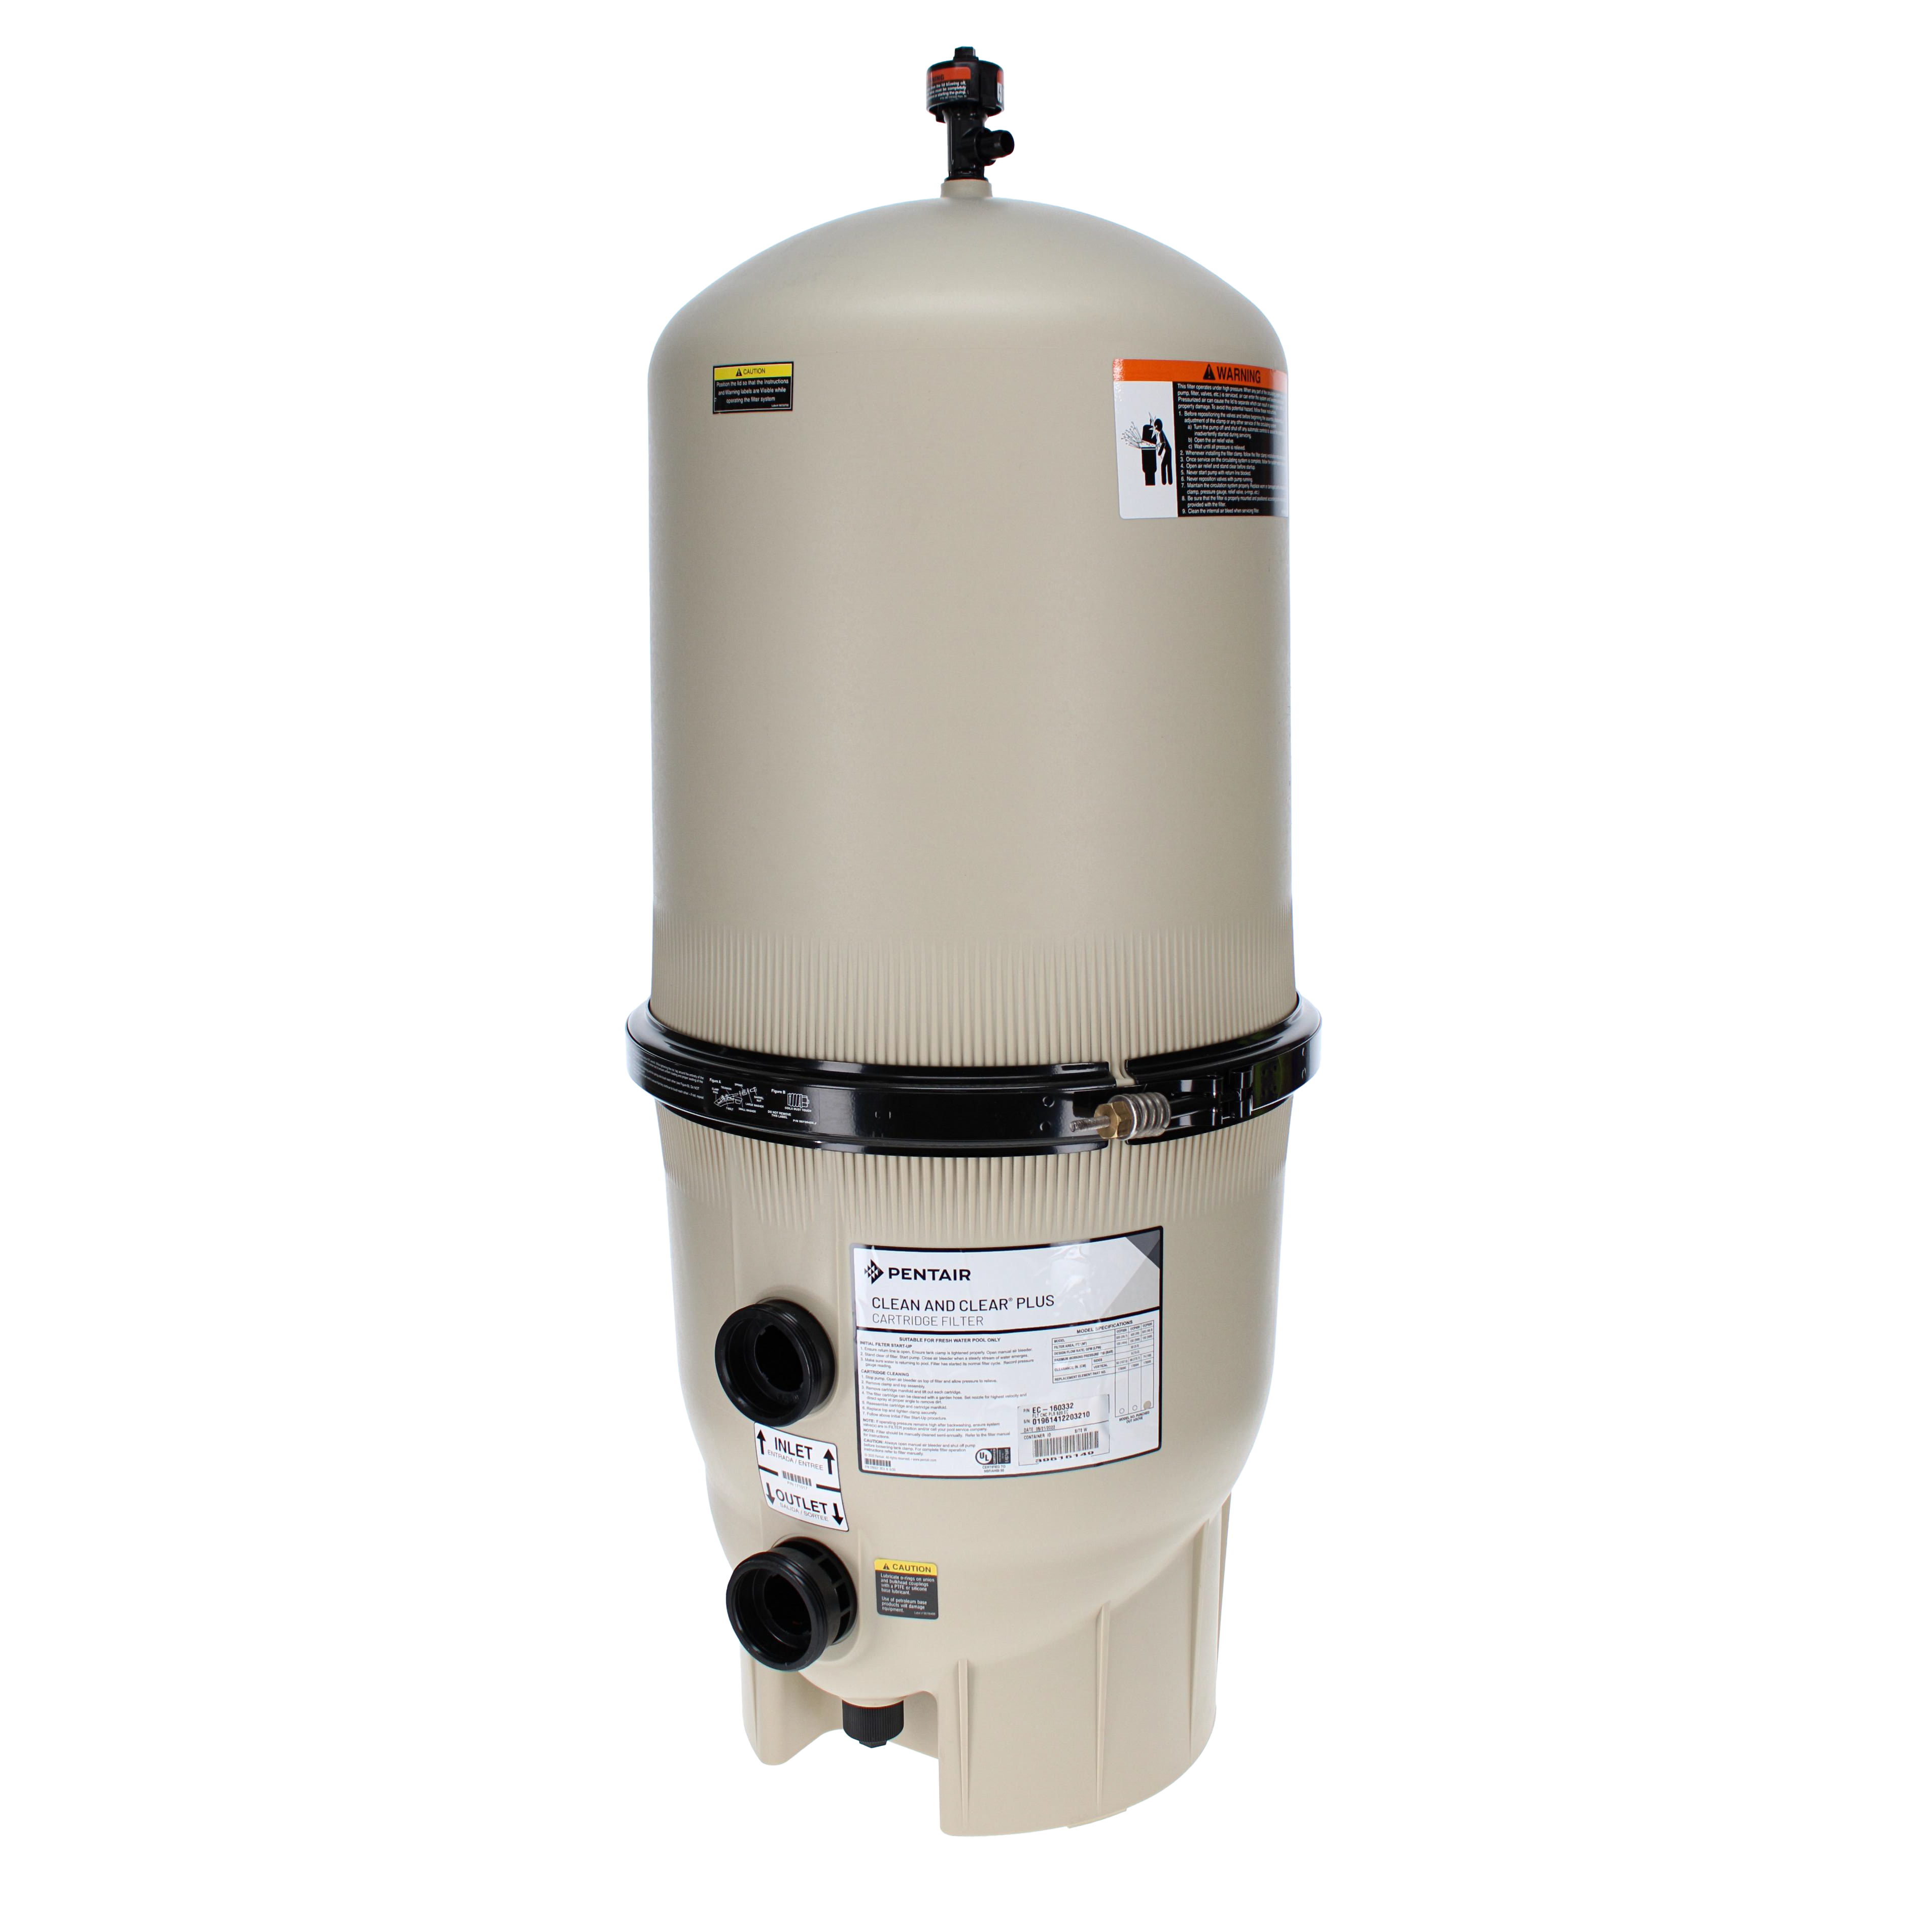 Clean & Clear Plus Cartridge Filter, Pool Filtration